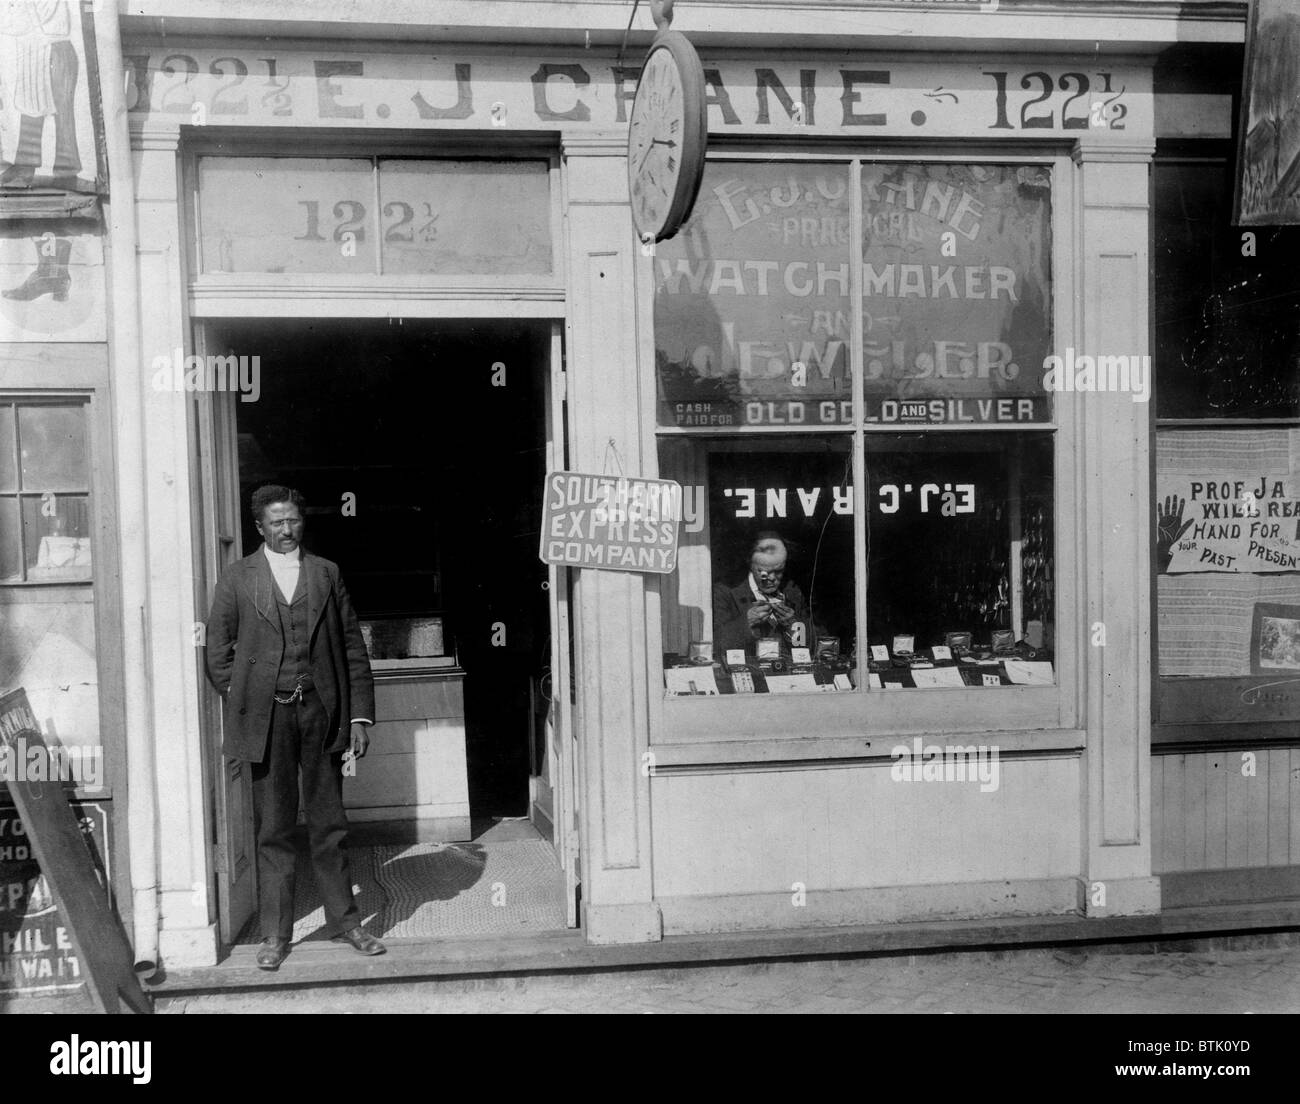 African American watchmaker, original title: 'E.J. Crane, watchmaker and jewelry store with man working in window and man standing in doorway', Richmond, Virginia, photograph, 1899. Stock Photo